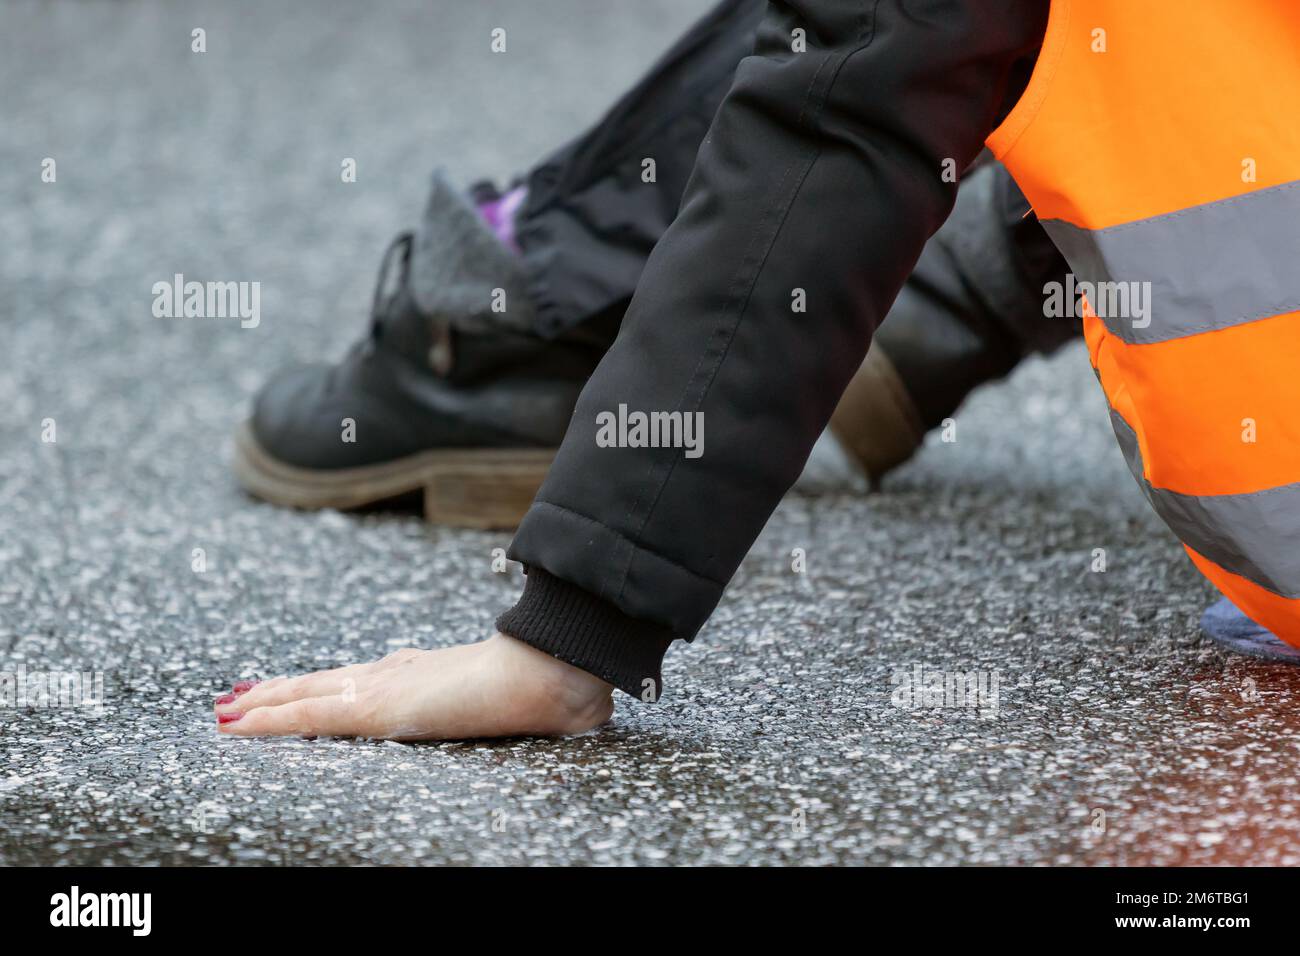 a climate activist glued herself to the asphalt with superglue Stock Photo